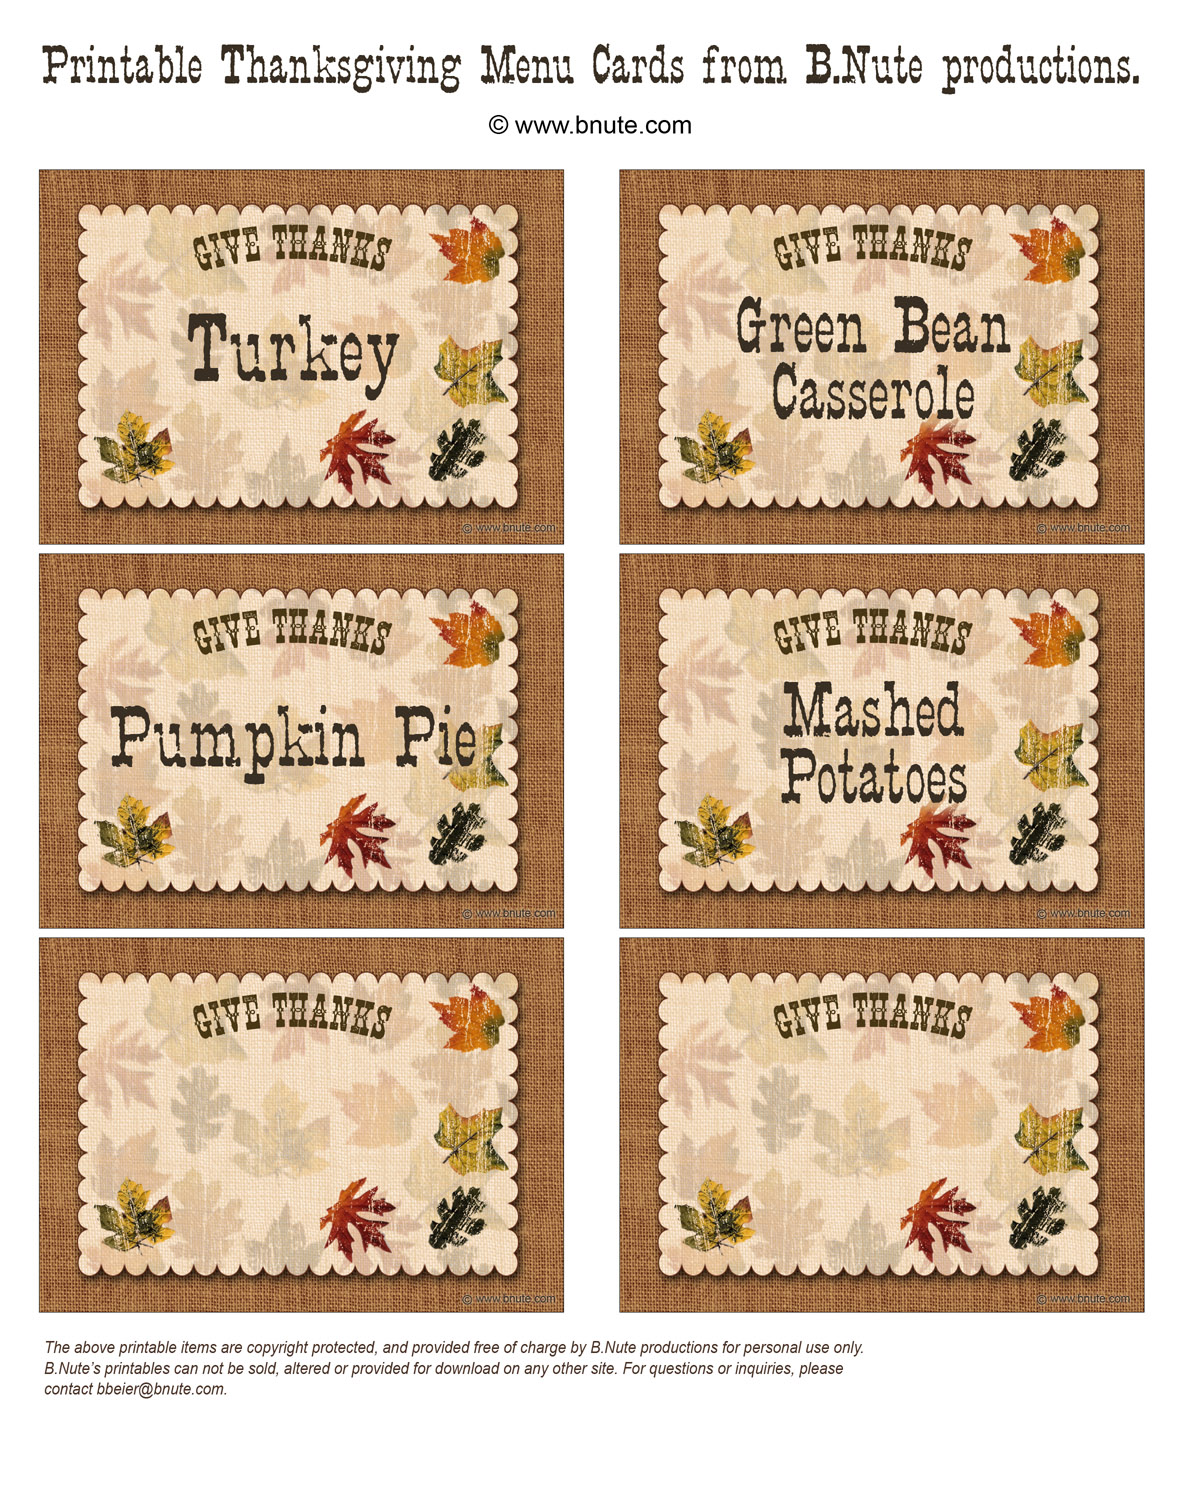 bnute productions: Free Printable Give Thanks Thanksgiving Menu Cards